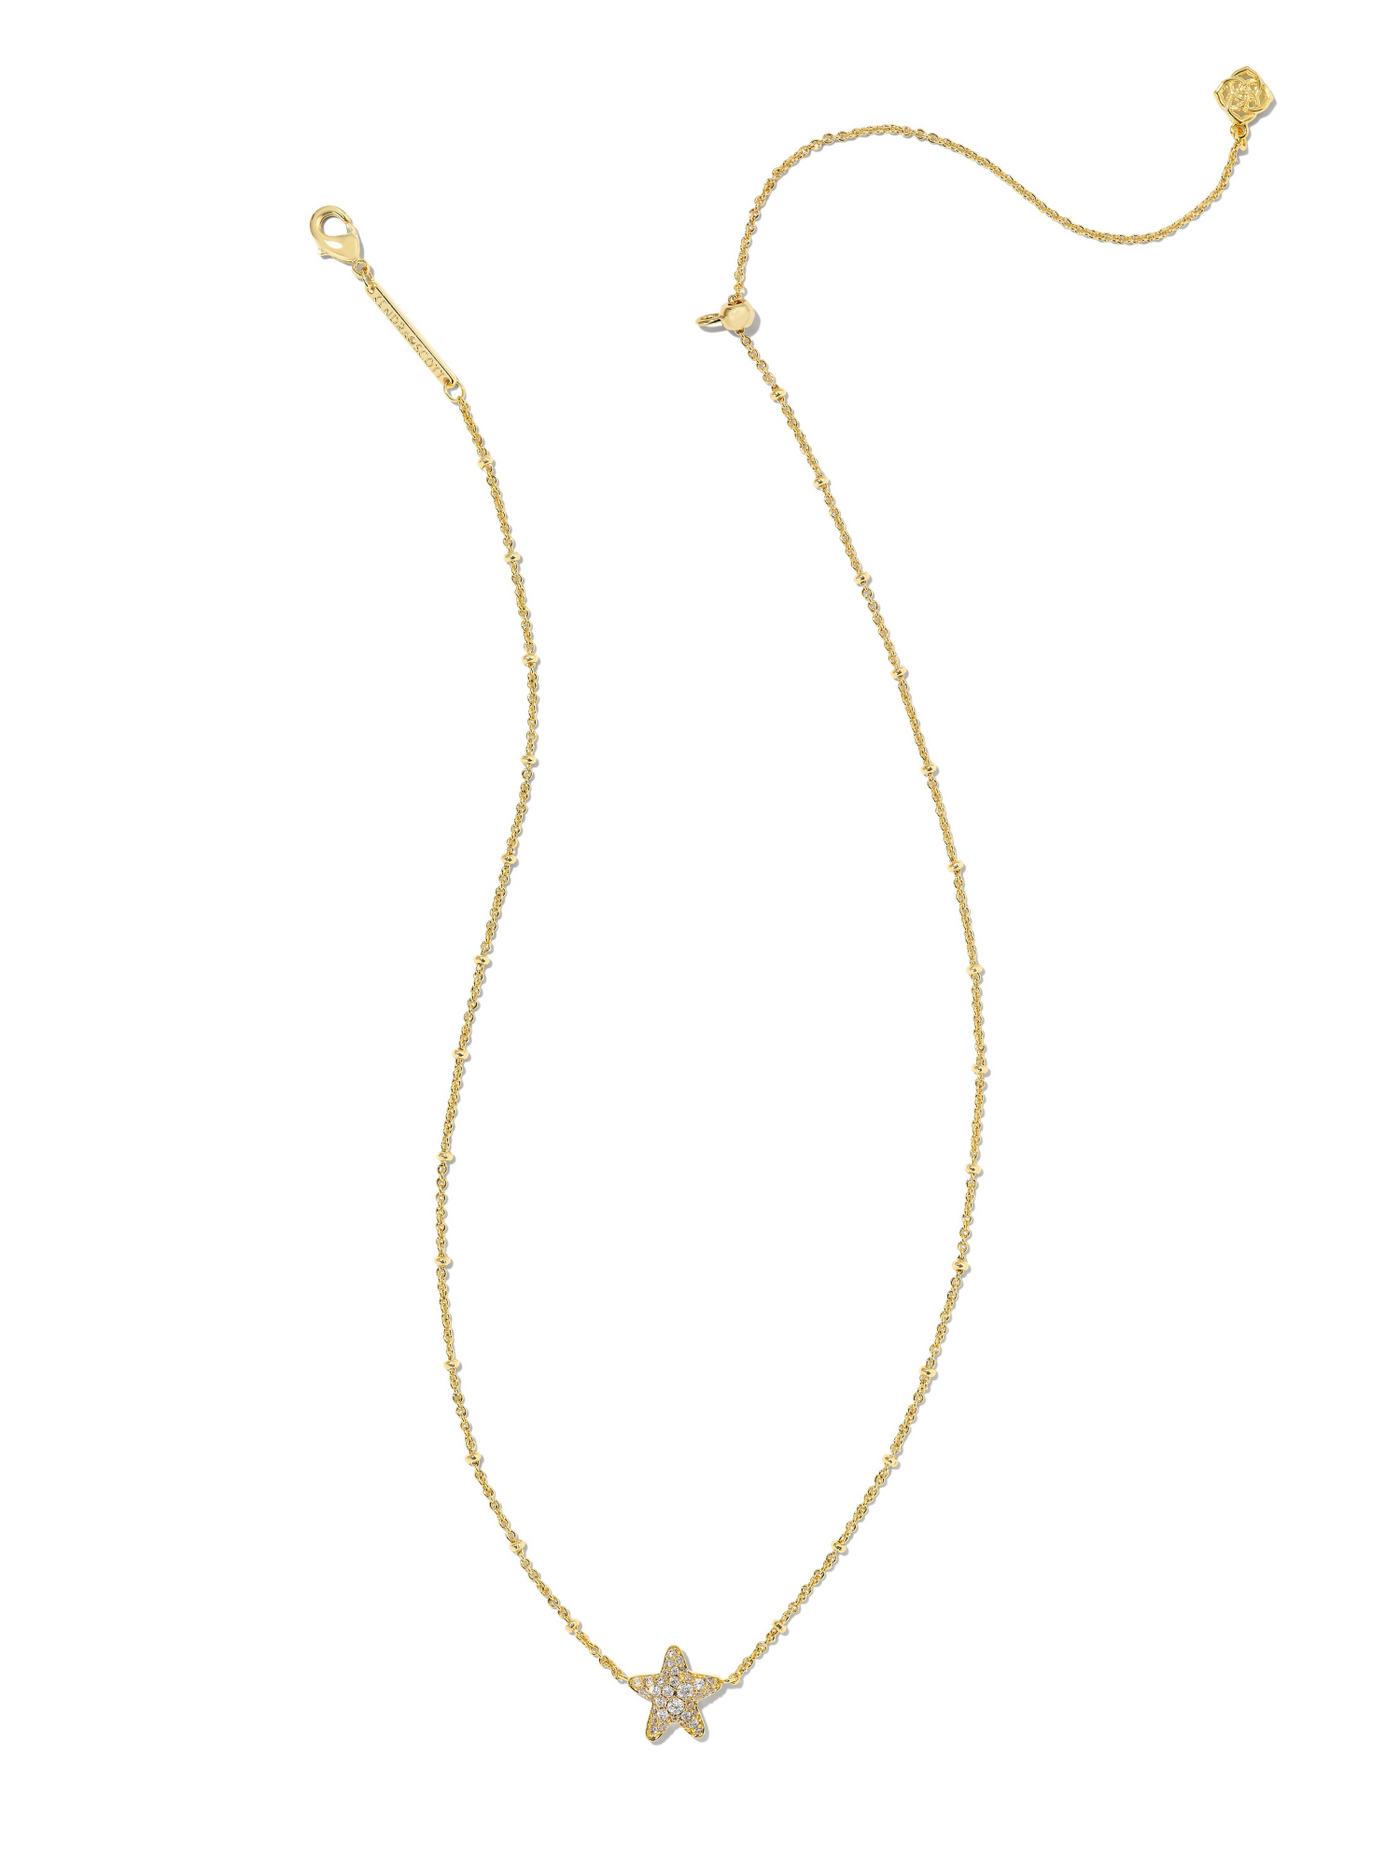 Kendra Scott Jae Star Pave Necklace in Gold White Crystal full view.